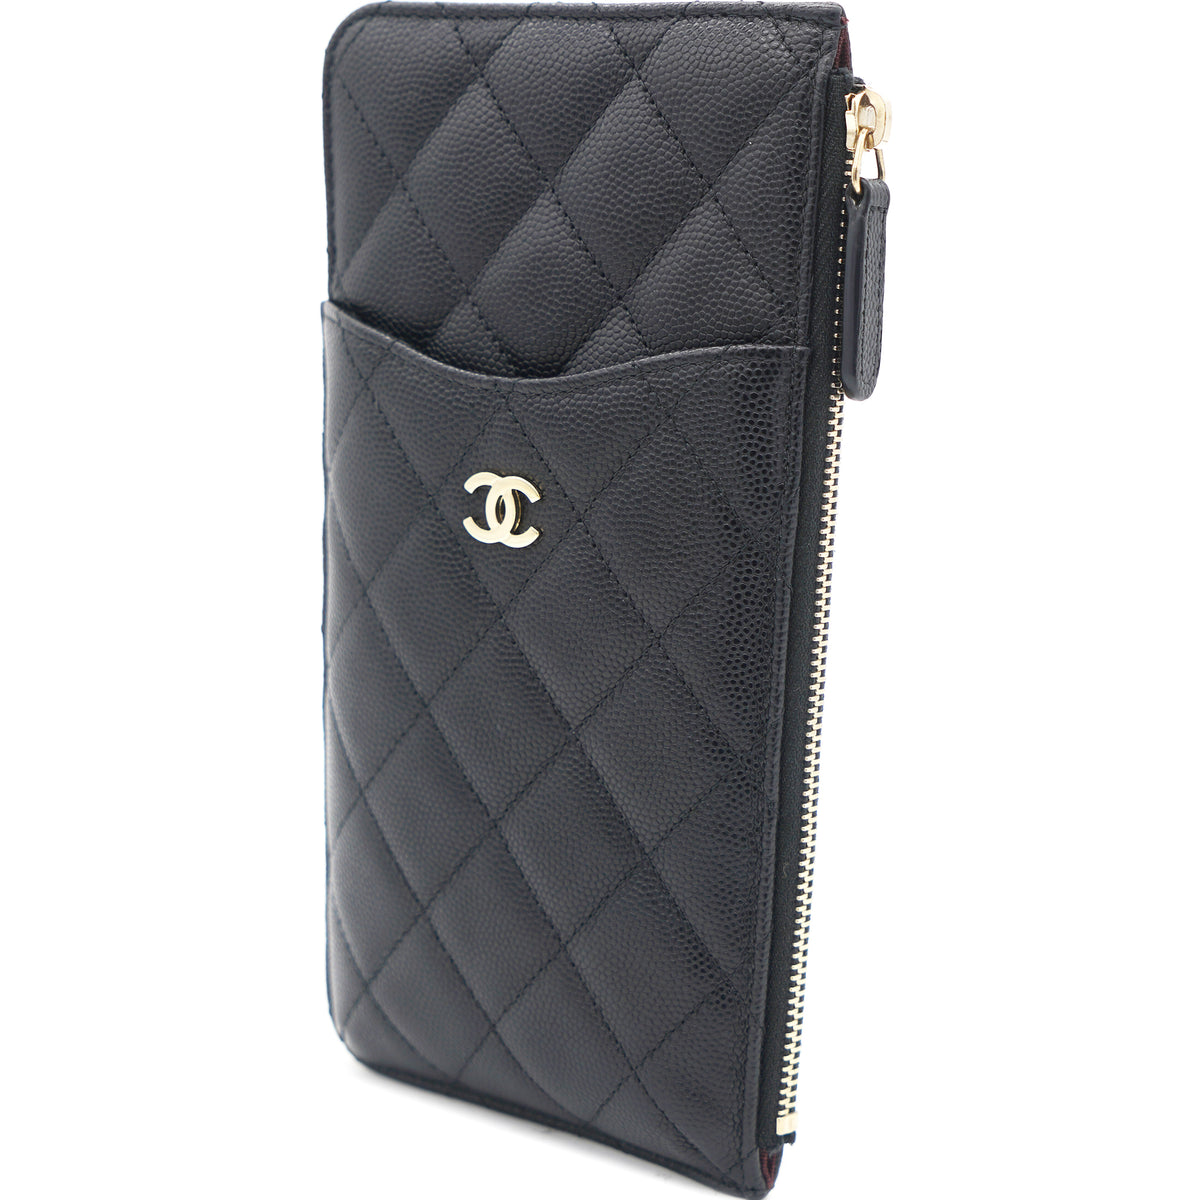 Chanel - Authenticated Cambon Wallet - Leather Black Plain for Women, Good Condition